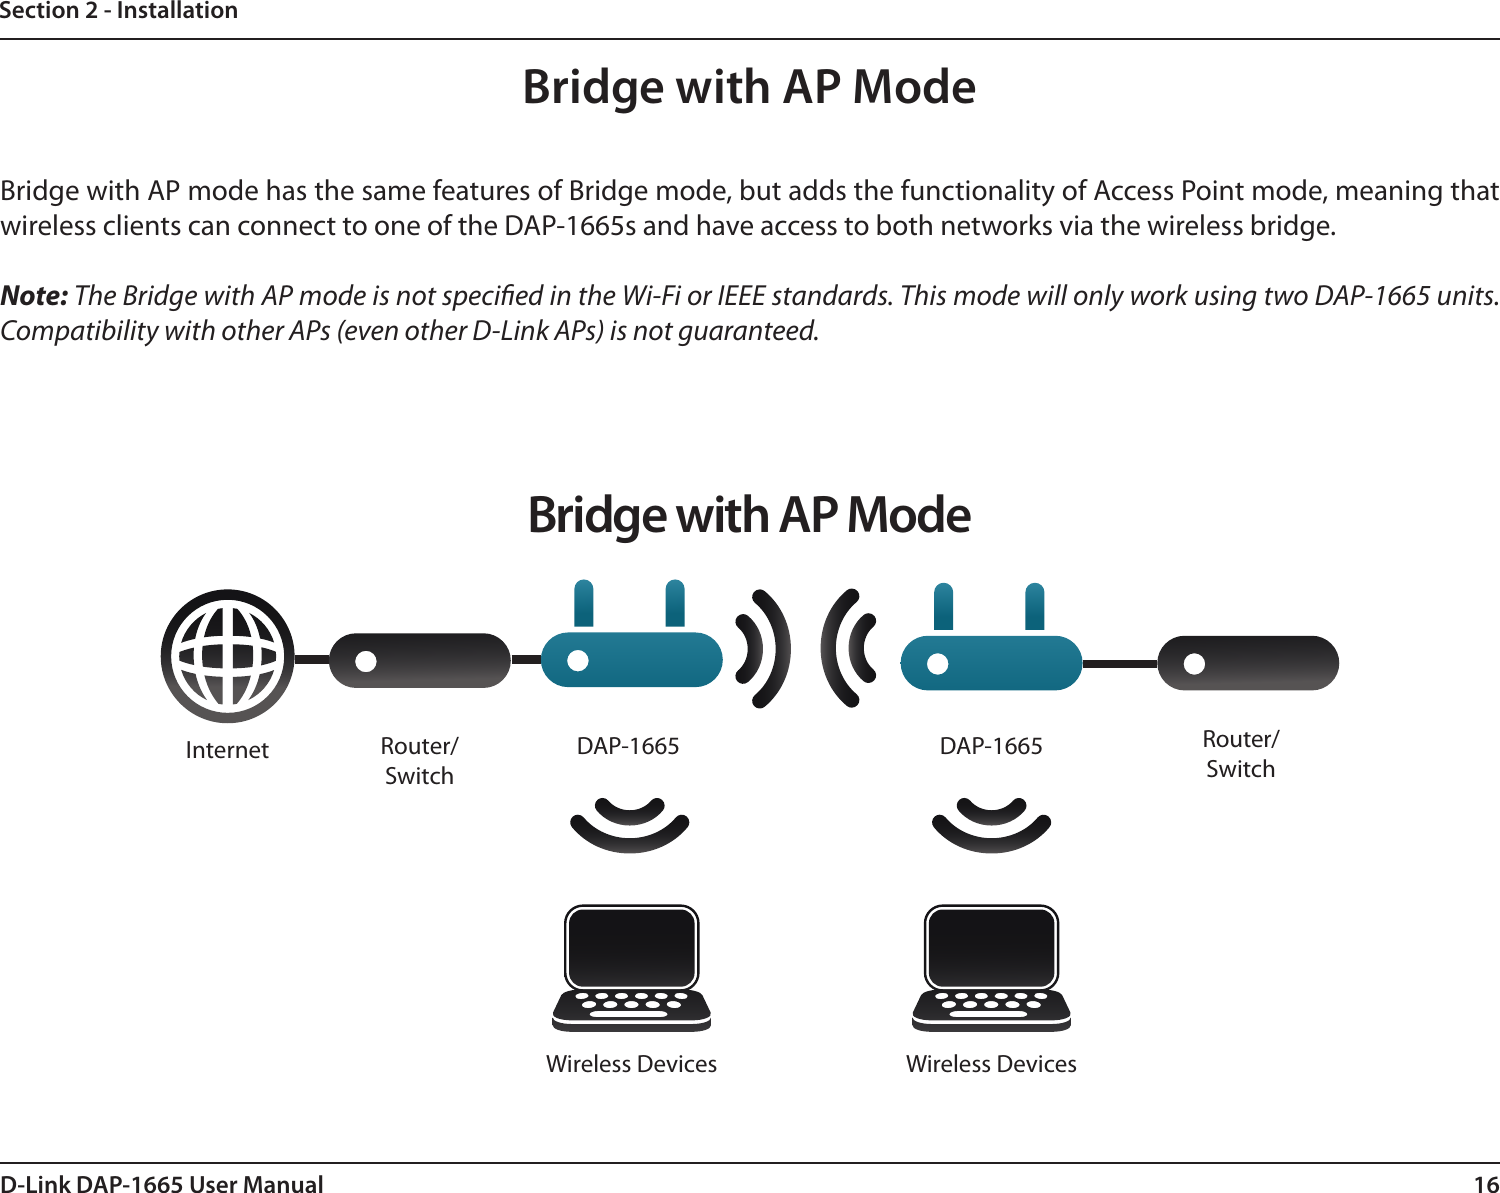 16D-Link DAP-1665 User ManualSection 2 - InstallationBridge with AP ModeBridge with AP mode has the same features of Bridge mode, but adds the functionality of Access Point mode, meaning that wireless clients can connect to one of the DAP-1665s and have access to both networks via the wireless bridge.Note: The Bridge with AP mode is not specied in the Wi-Fi or IEEE standards. This mode will only work using two DAP-1665 units. Compatibility with other APs (even other D-Link APs) is not guaranteed.Bridge with AP ModeInternet DAP-1665 DAP-1665 Router/SwitchRouter/SwitchWireless Devices Wireless Devices